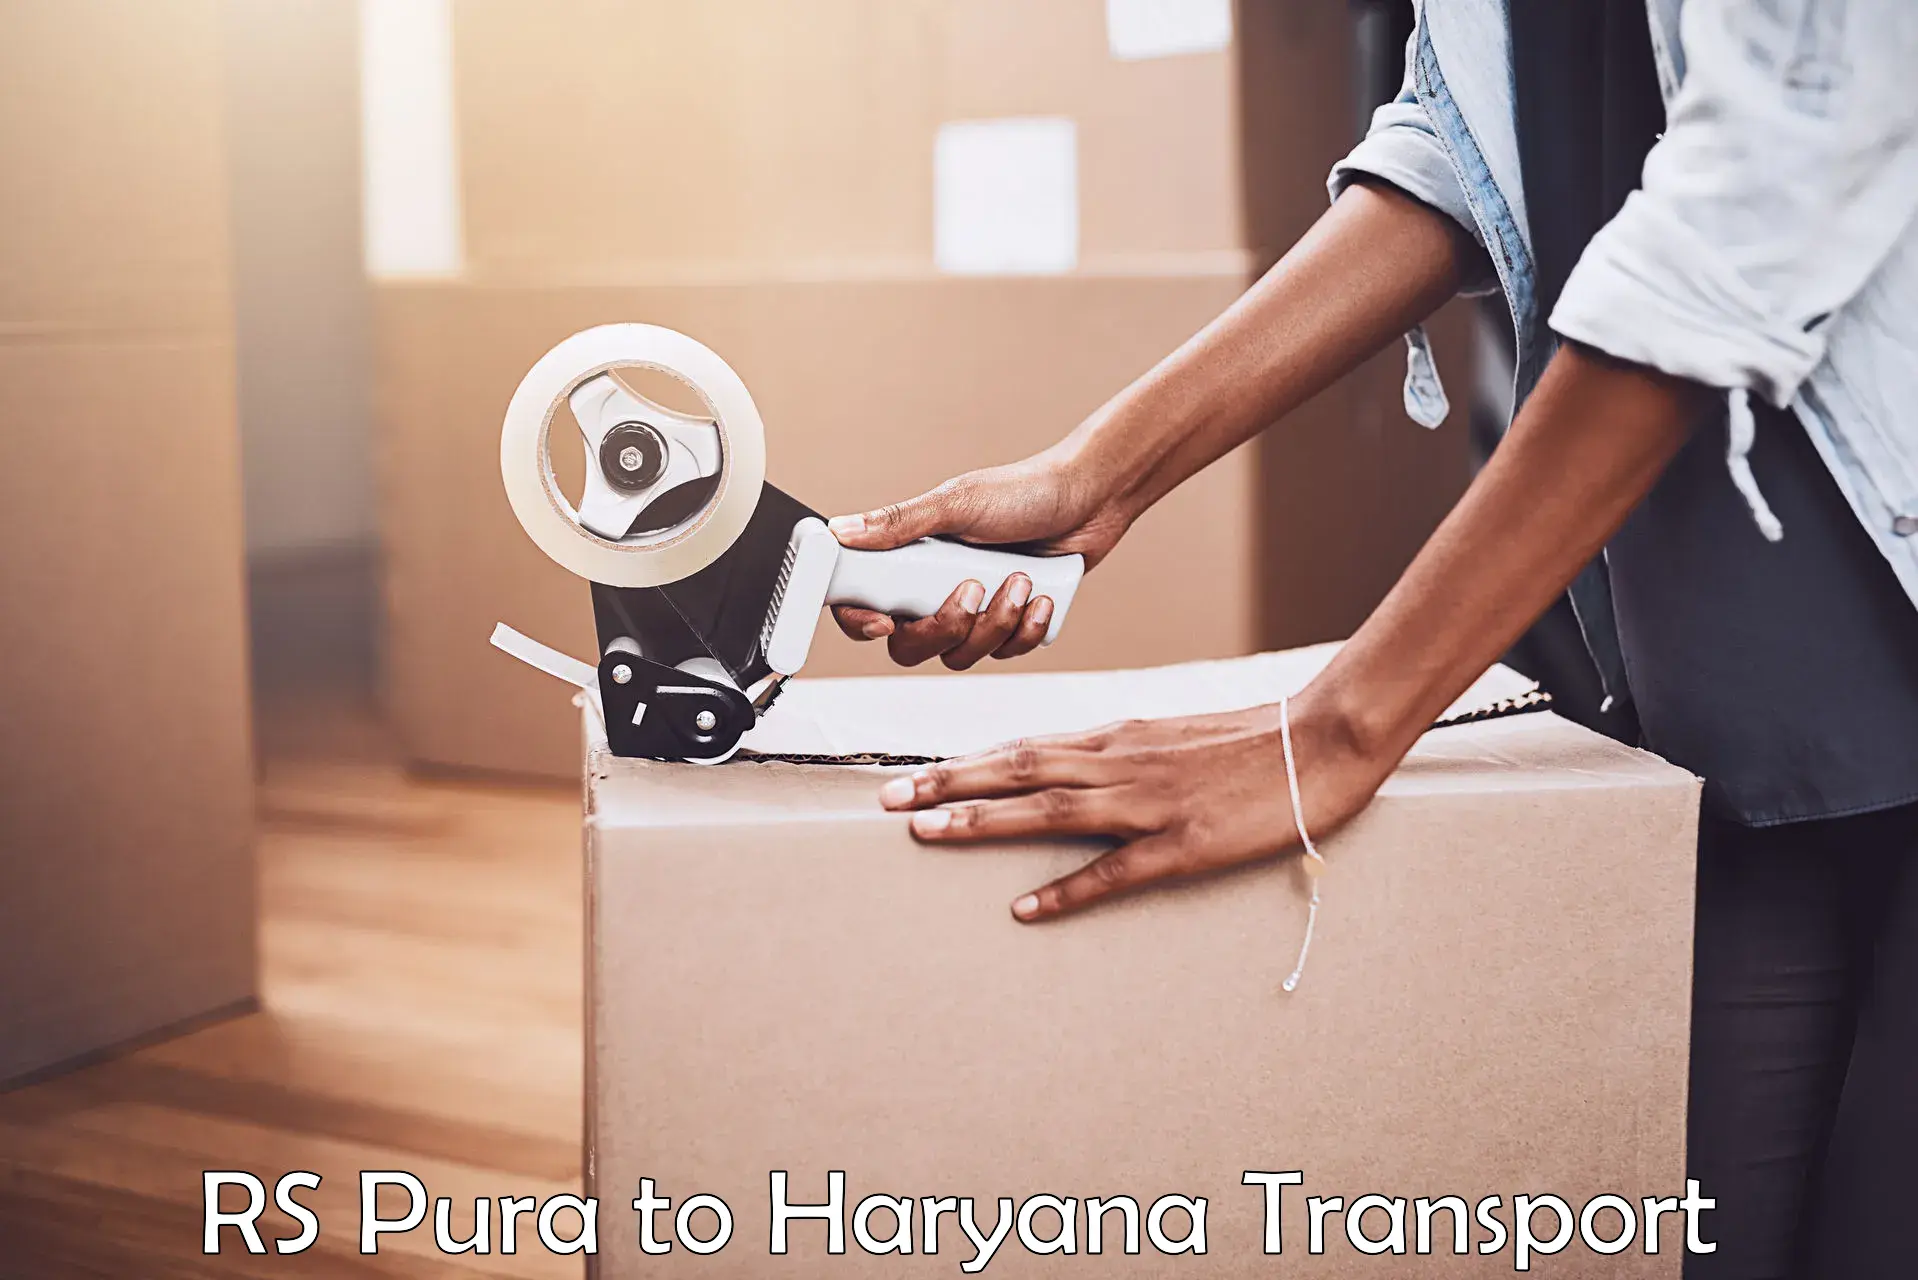 Air cargo transport services RS Pura to Haryana